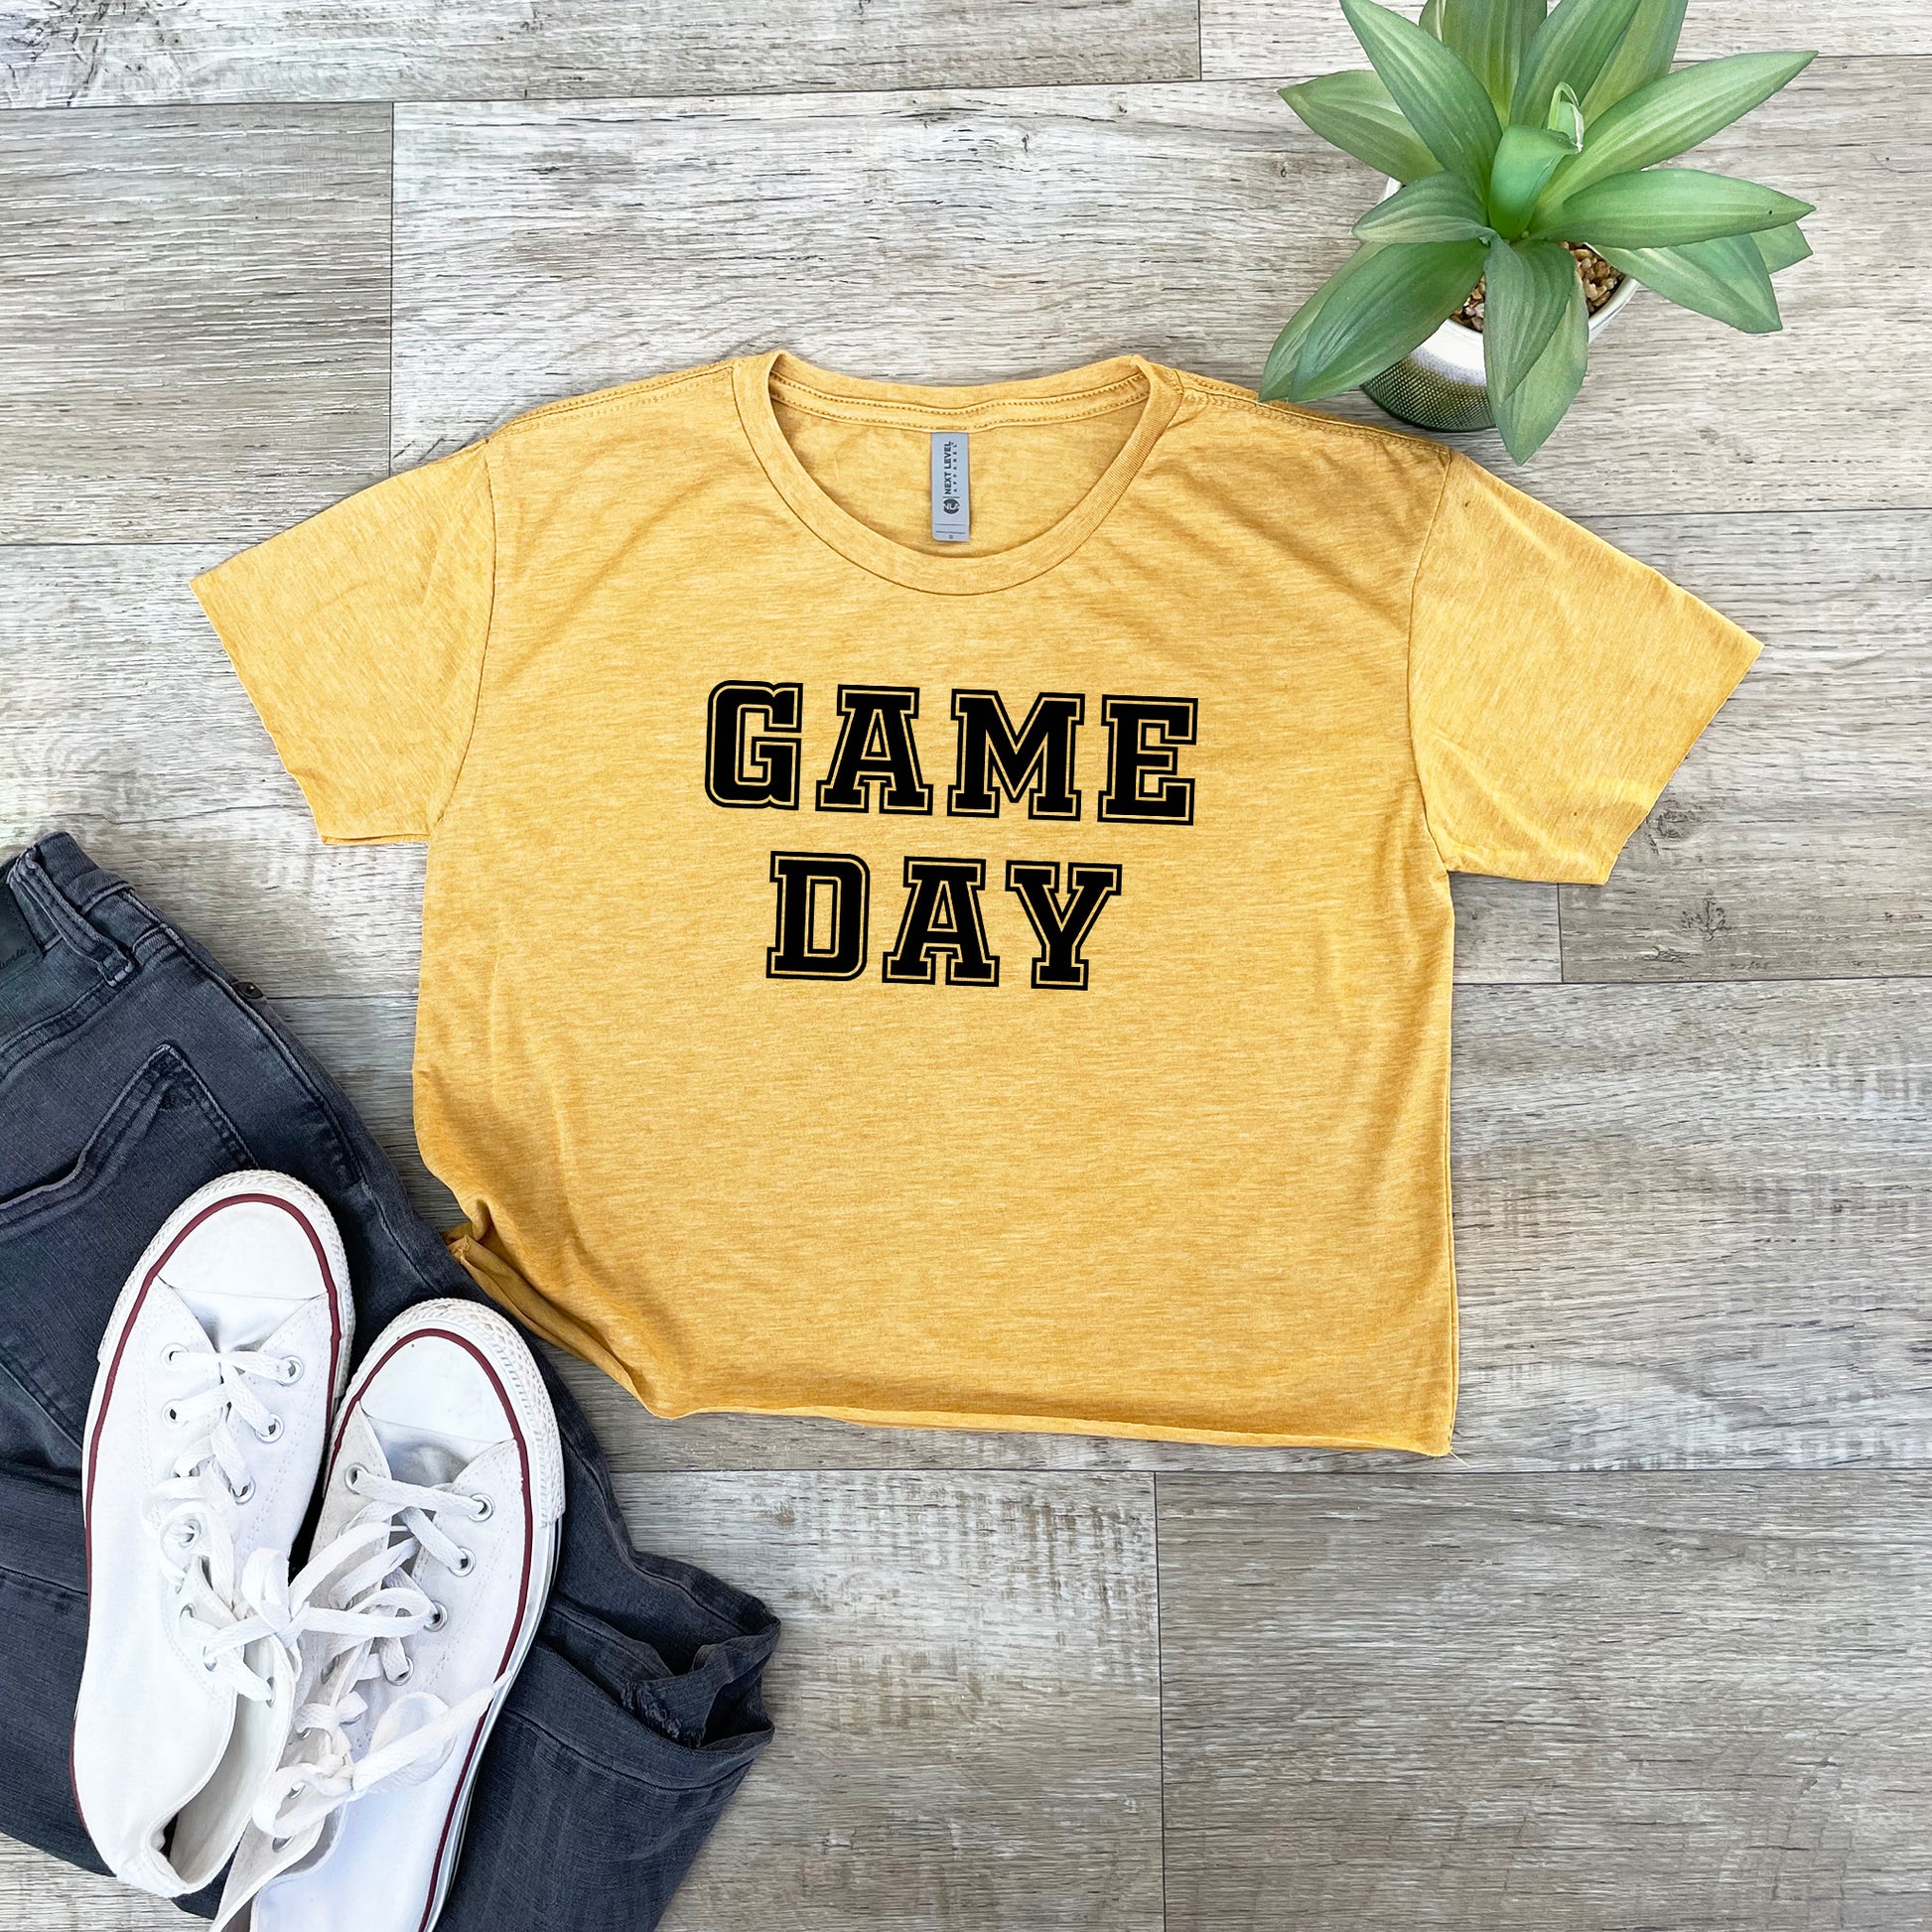 a t - shirt that says game day next to a pair of jeans